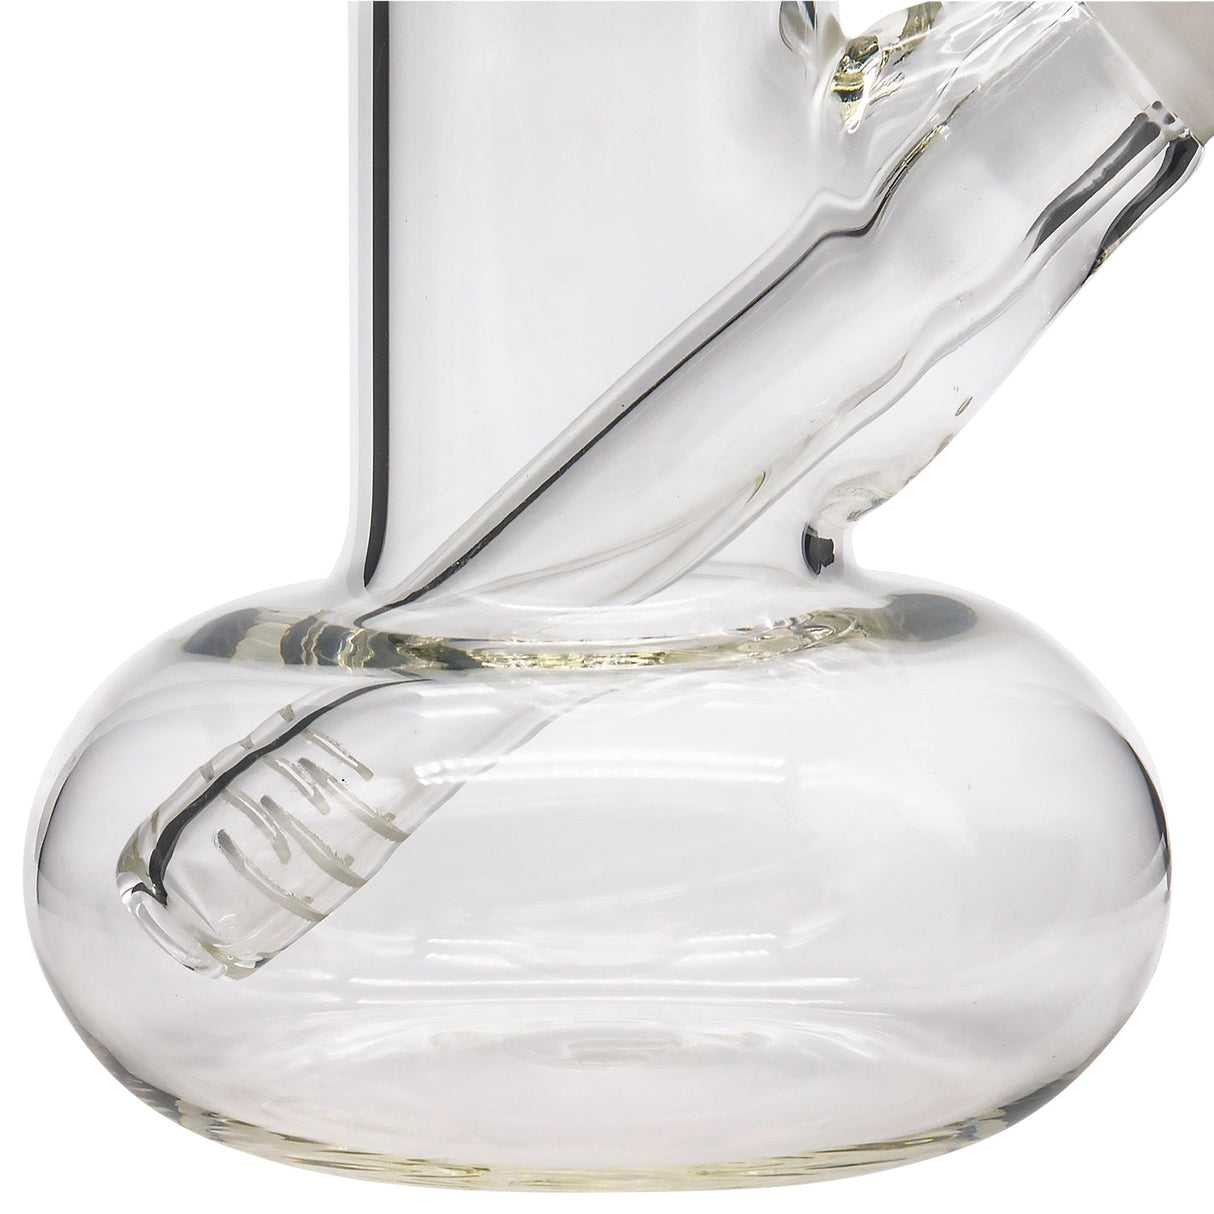 Close-up of LA Pipes Donut Base Bong in Borosilicate Glass, 45 Degree Joint, USA Made